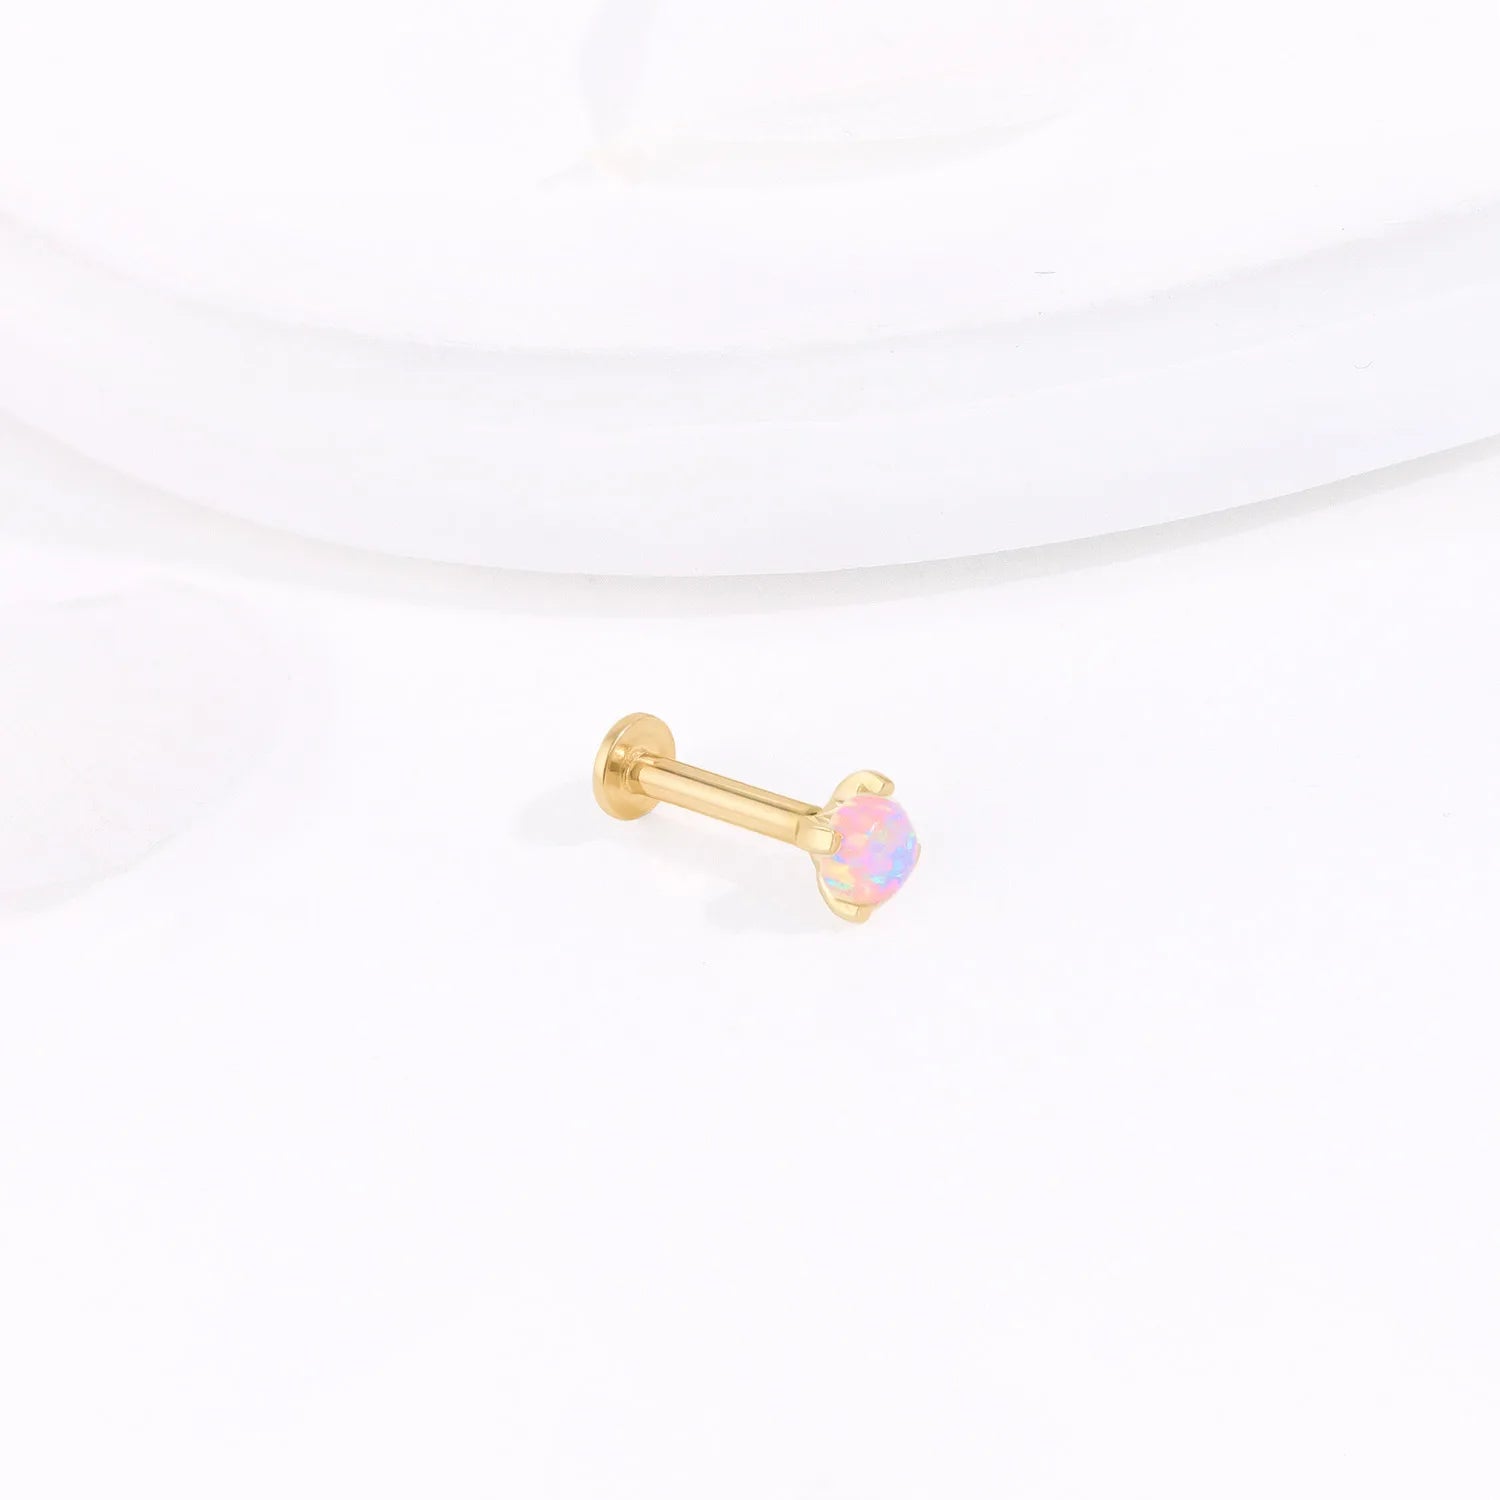 Solid gold nose stud with opal 14K gold lip piercing Ashley Piercing Jewelry